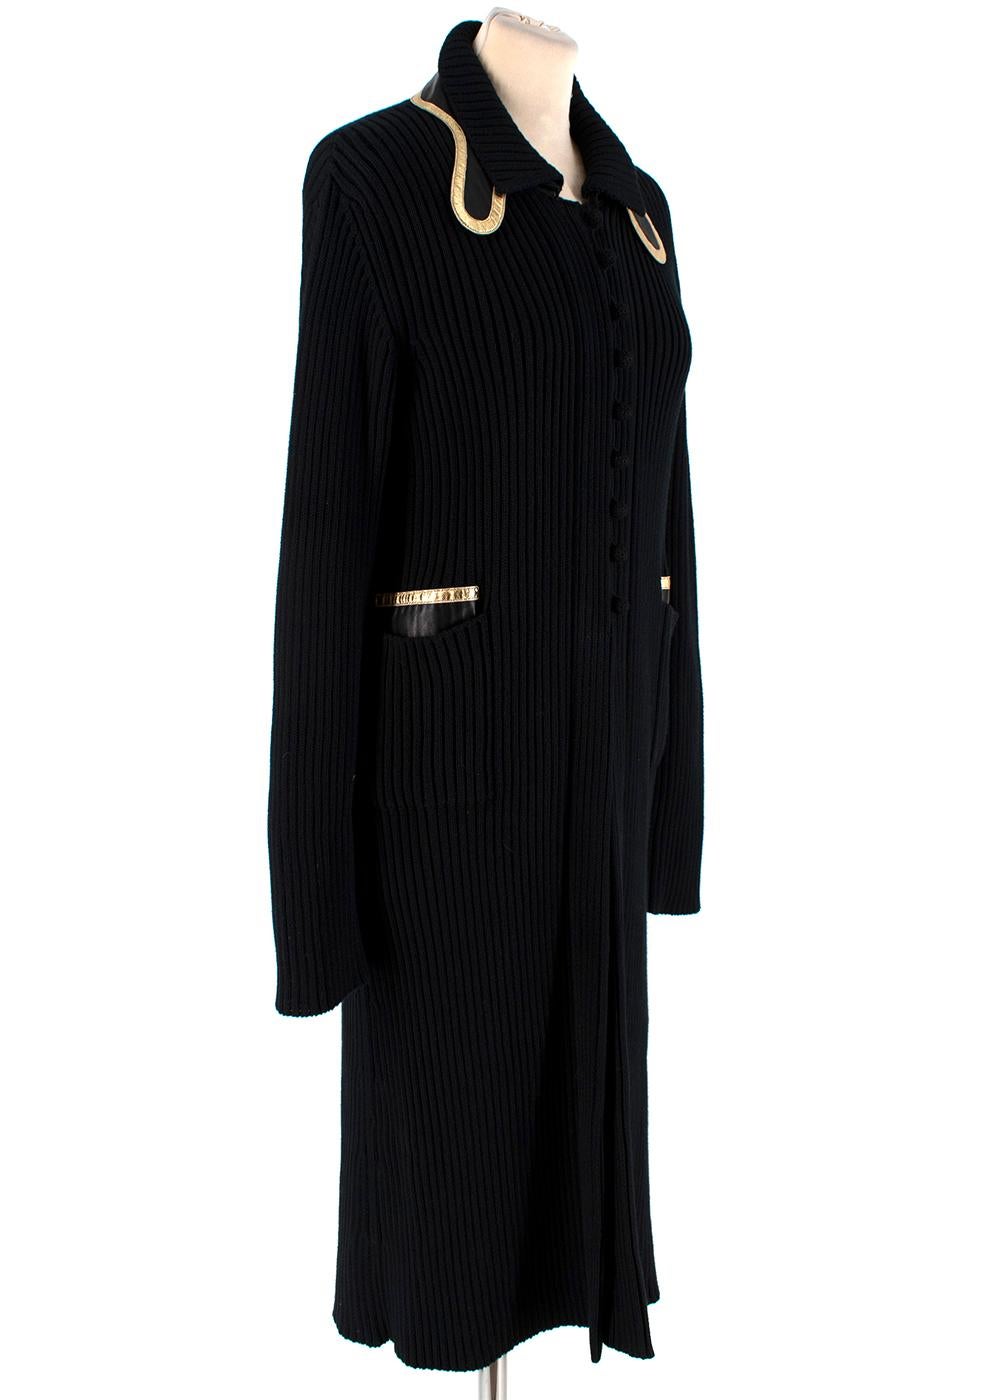 Prada Black ribbed knitted Long Cardigan with Gold Trim

- Leather and Gold trim to collar and pockets 
- Button down front closure 
-  straight hemline 
- ribbed texture to knit 


Materials 
100% Cotton 

shoulder: 14cm
sleeves: 64cm
Length: 96cm